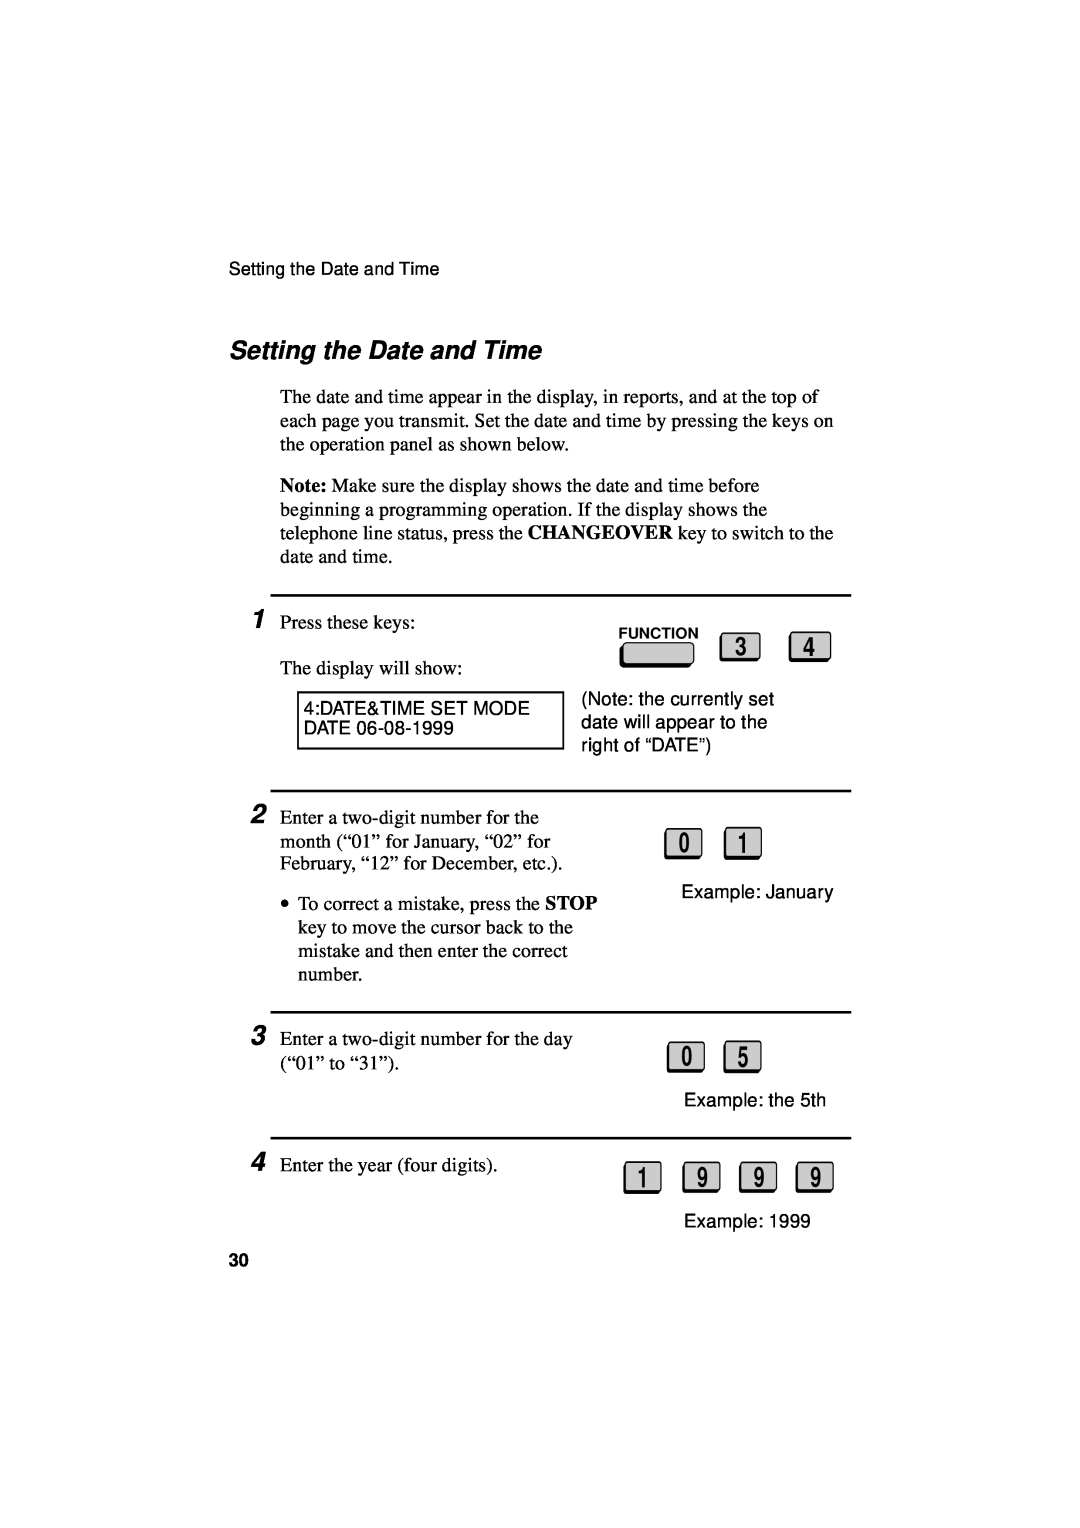 Sharp FO-5550, FO-5700, FO-4700 operation manual 1 9 9, Setting the Date and Time 